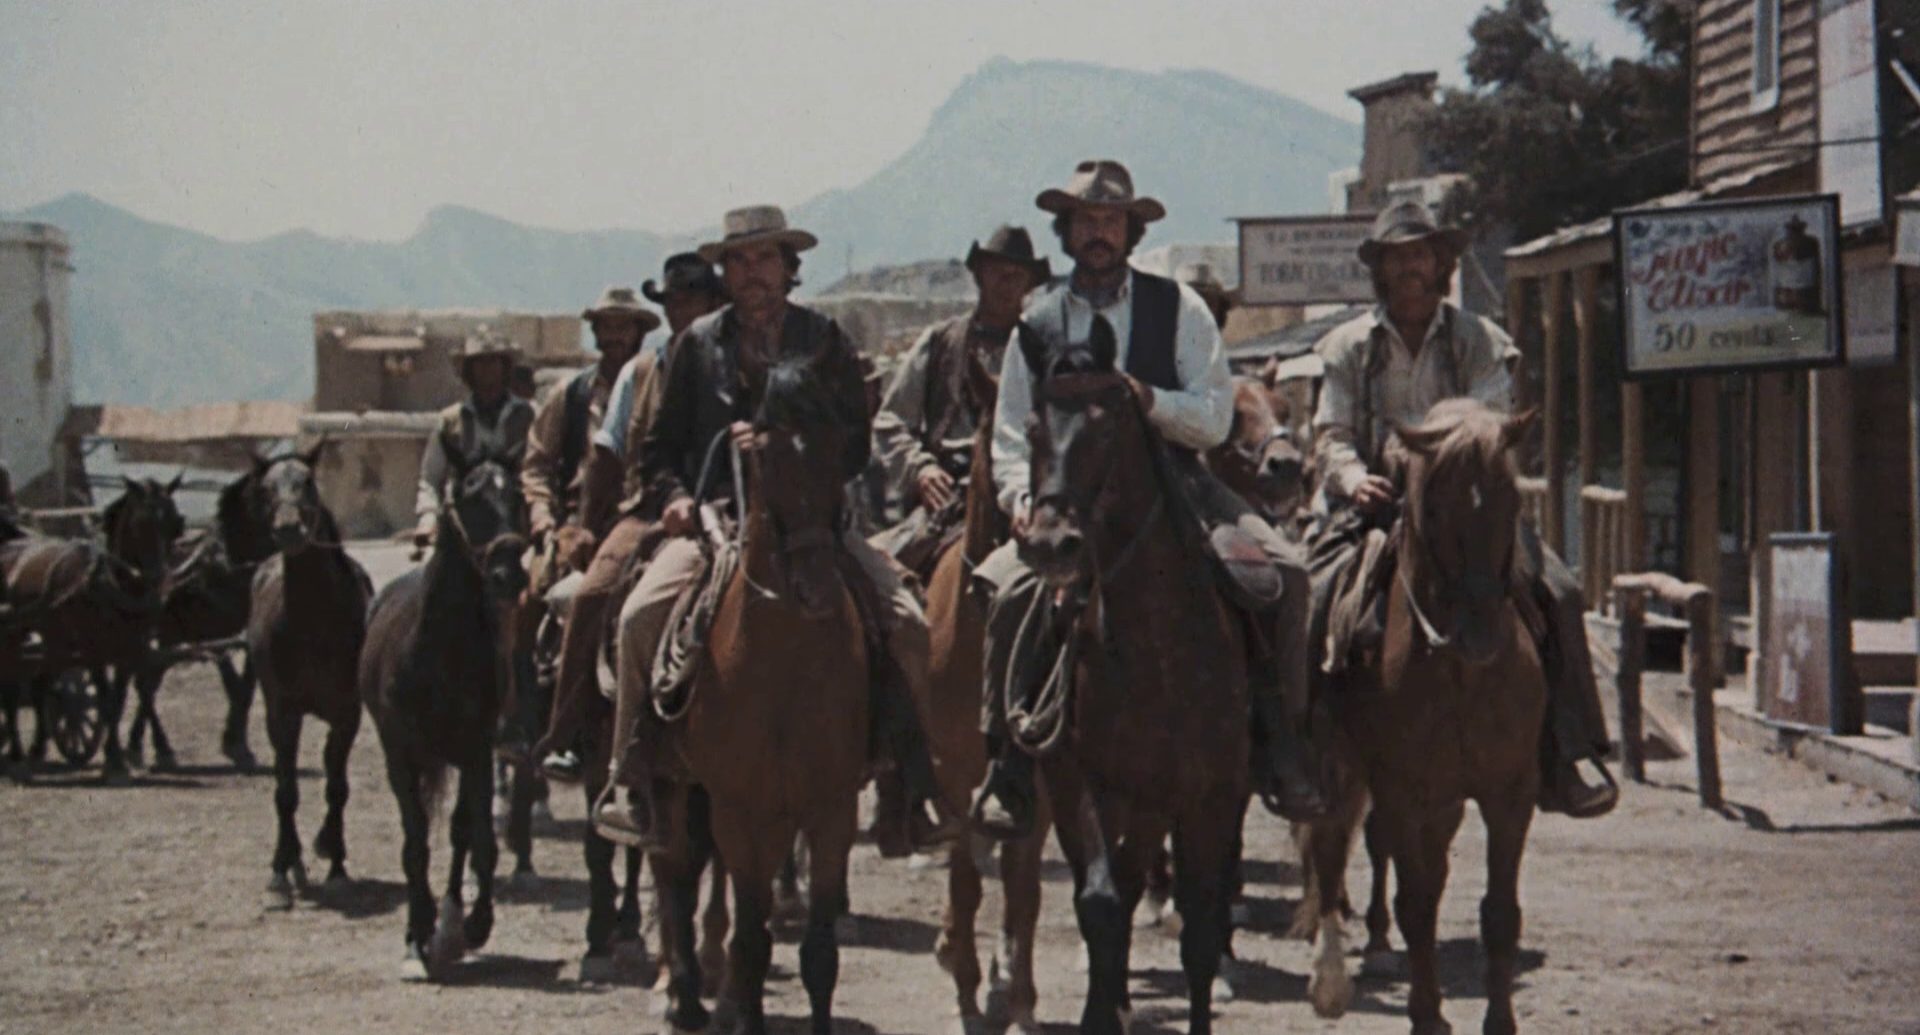 A troop of bandits on horseback in a small town.